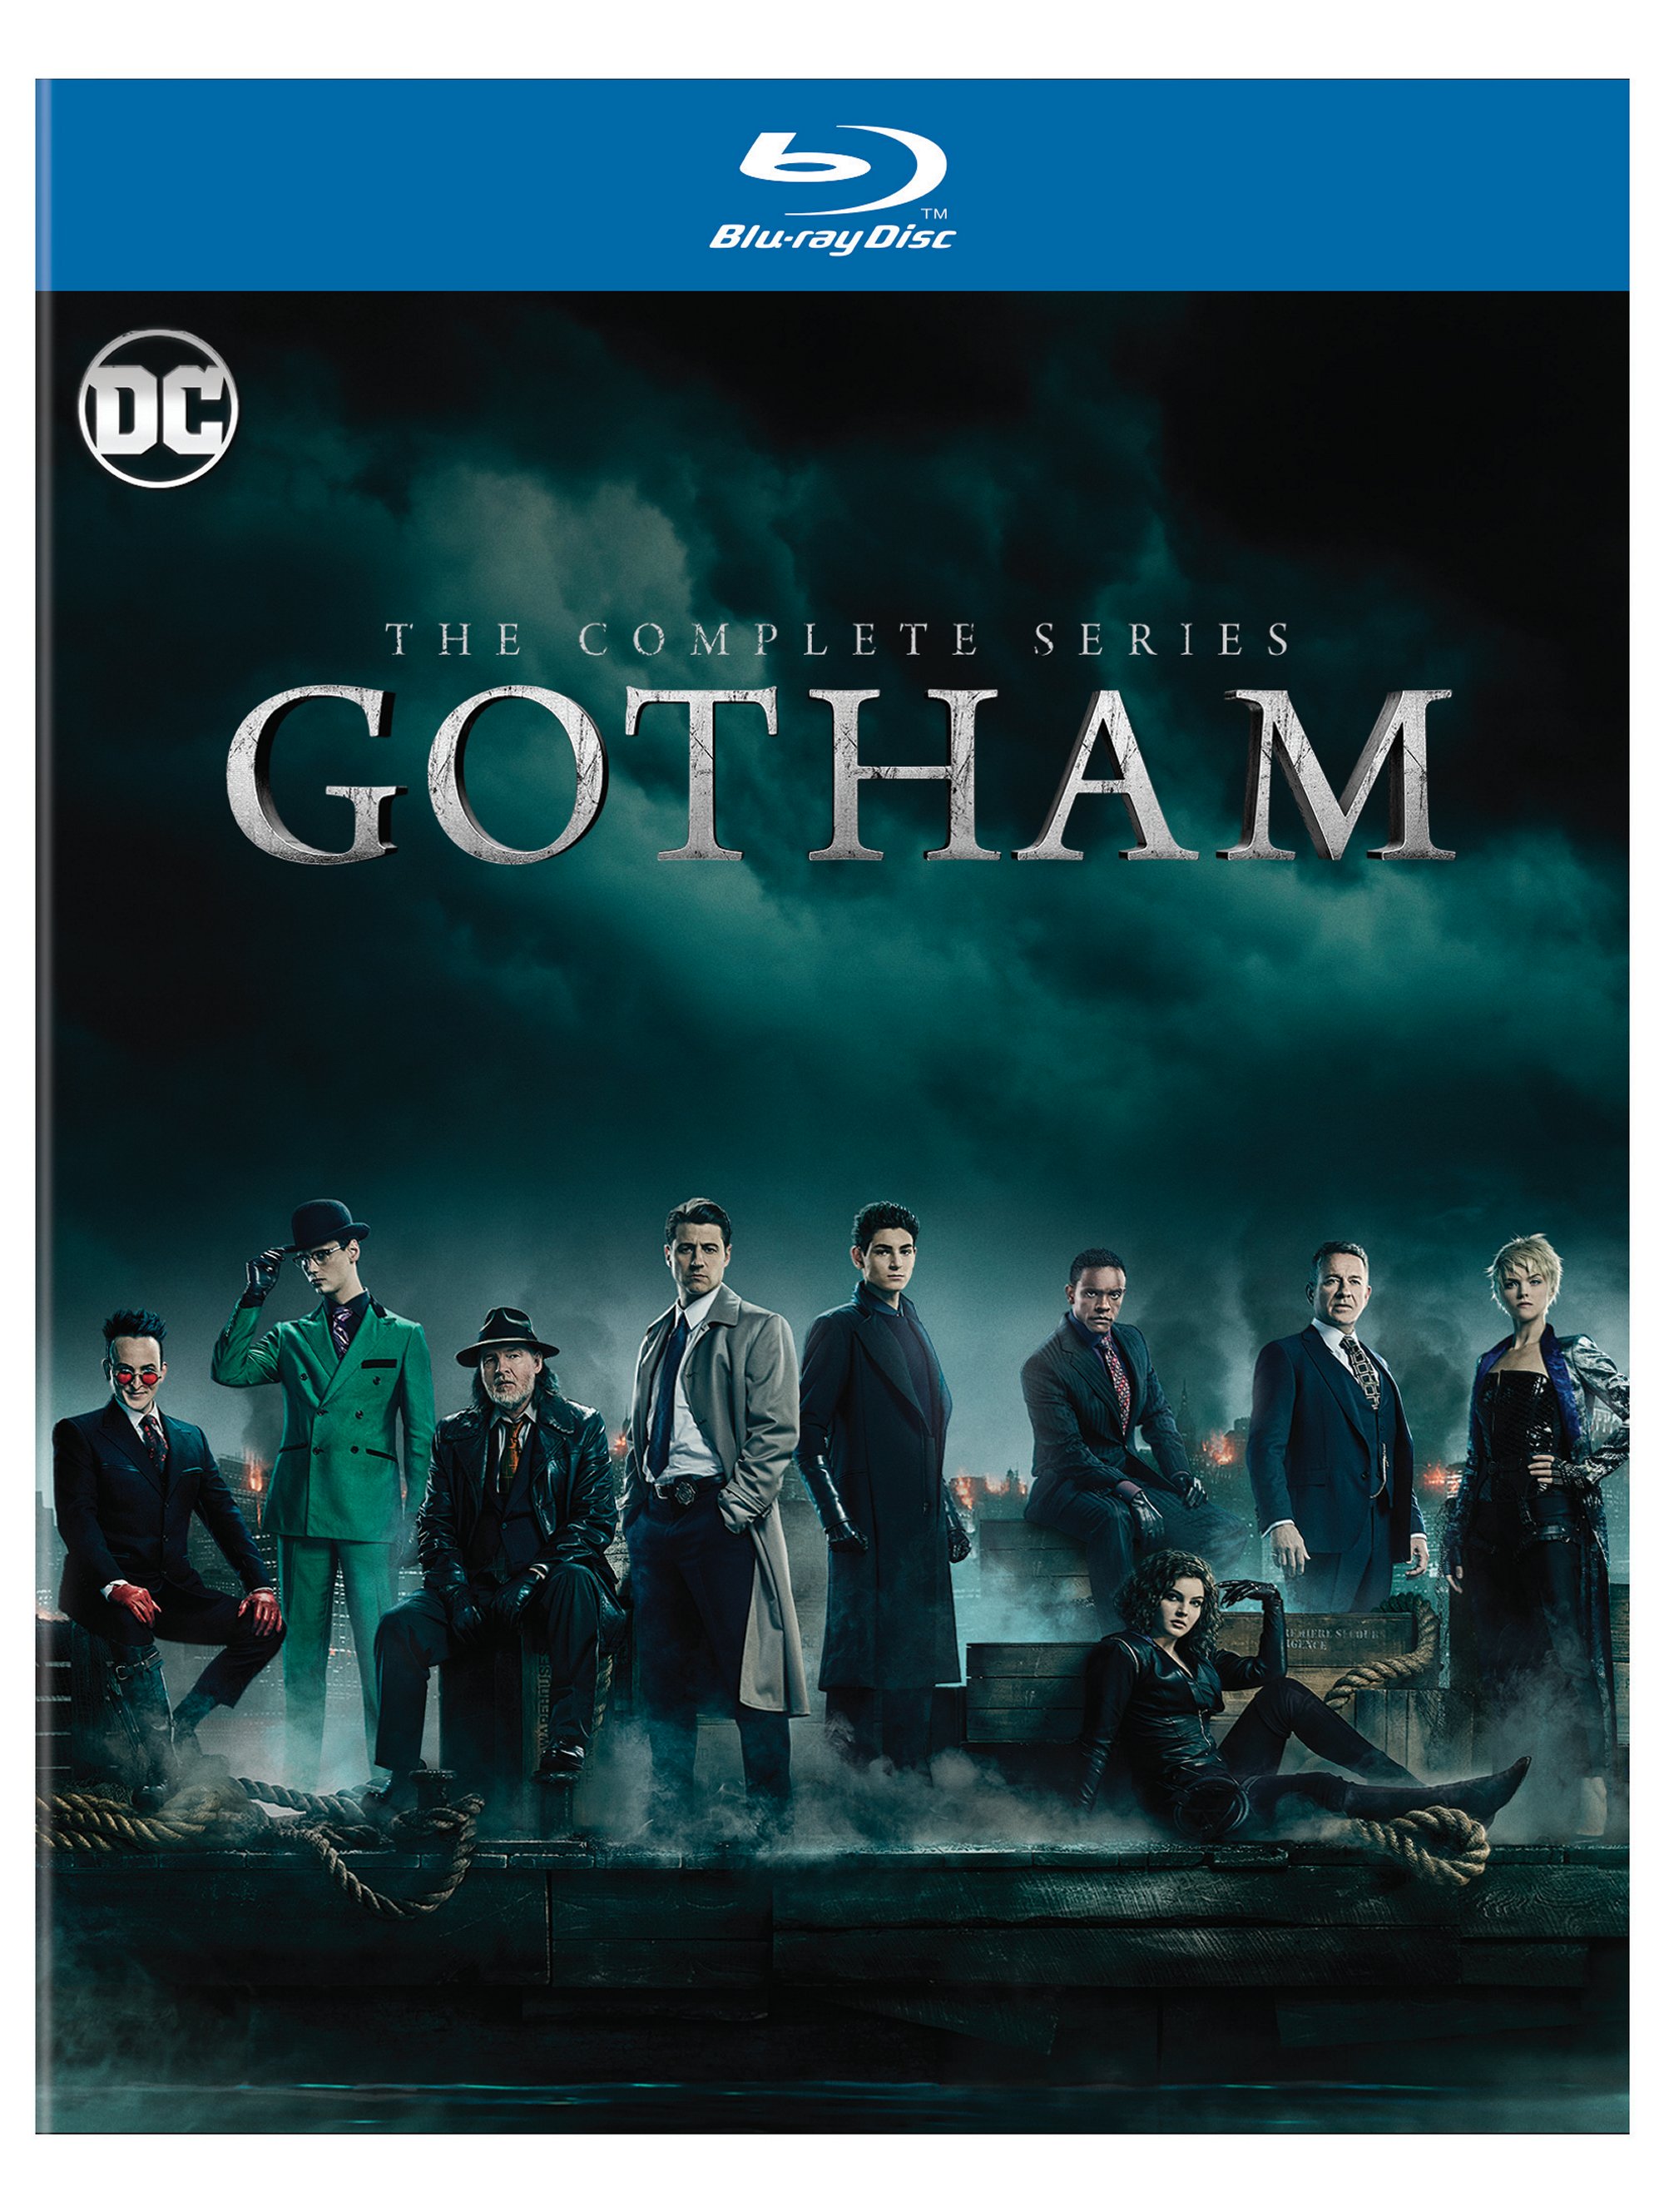 Gotham: The Complete Series (Box Set) - Blu-ray [ 2019 ]  - Drama Television On Blu-ray - TV Shows On GRUV